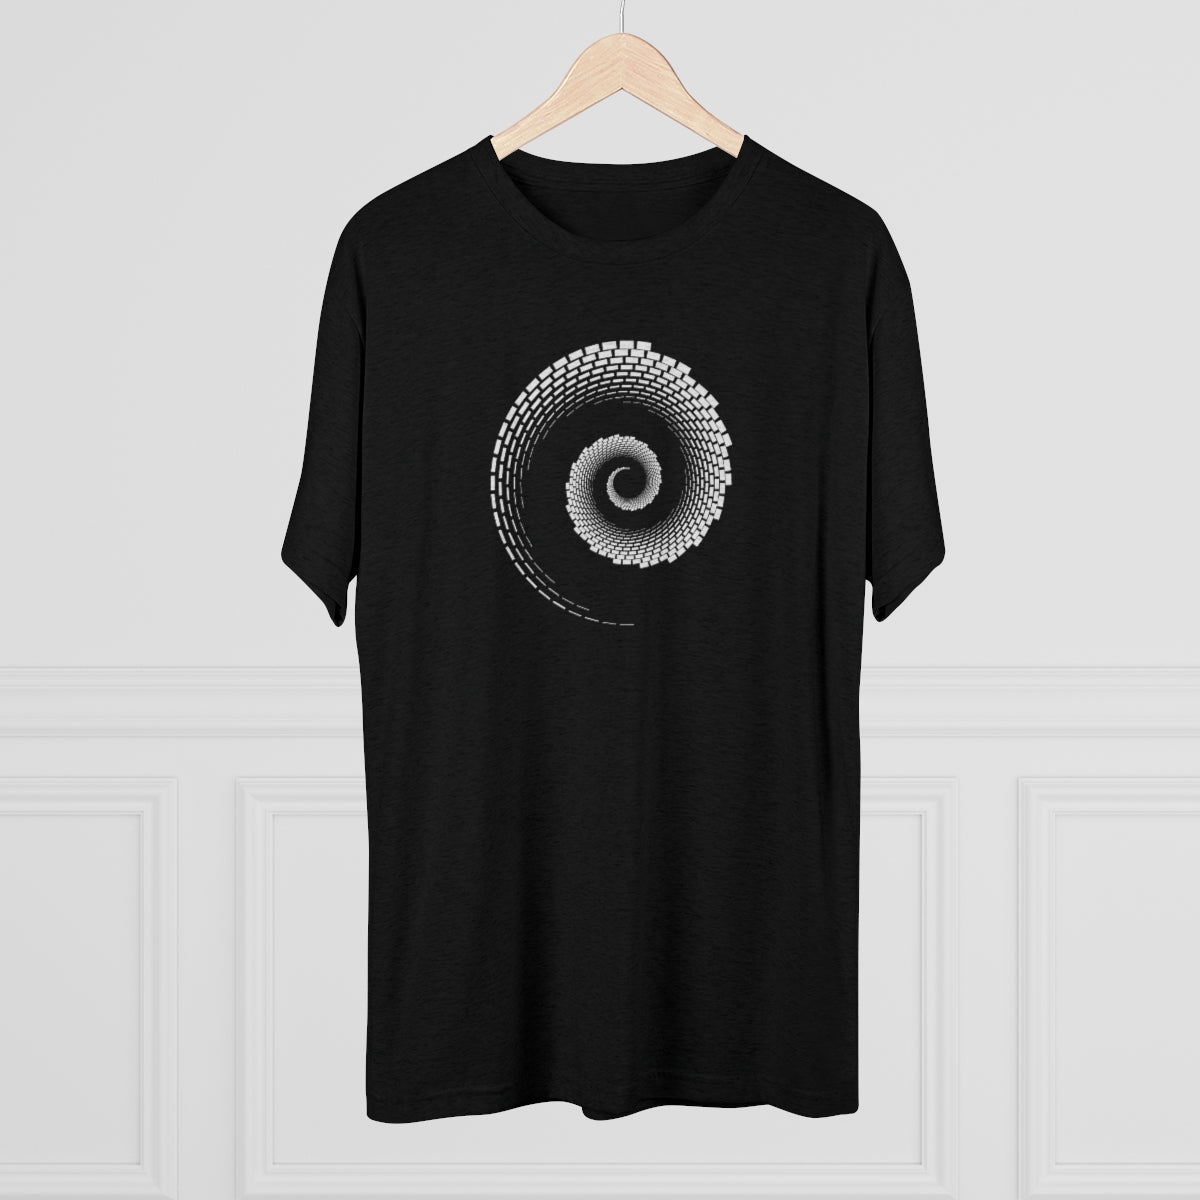 Special Collection – Centric – Spiral Galaxy: Unisex Tri-Blend Crew Tee